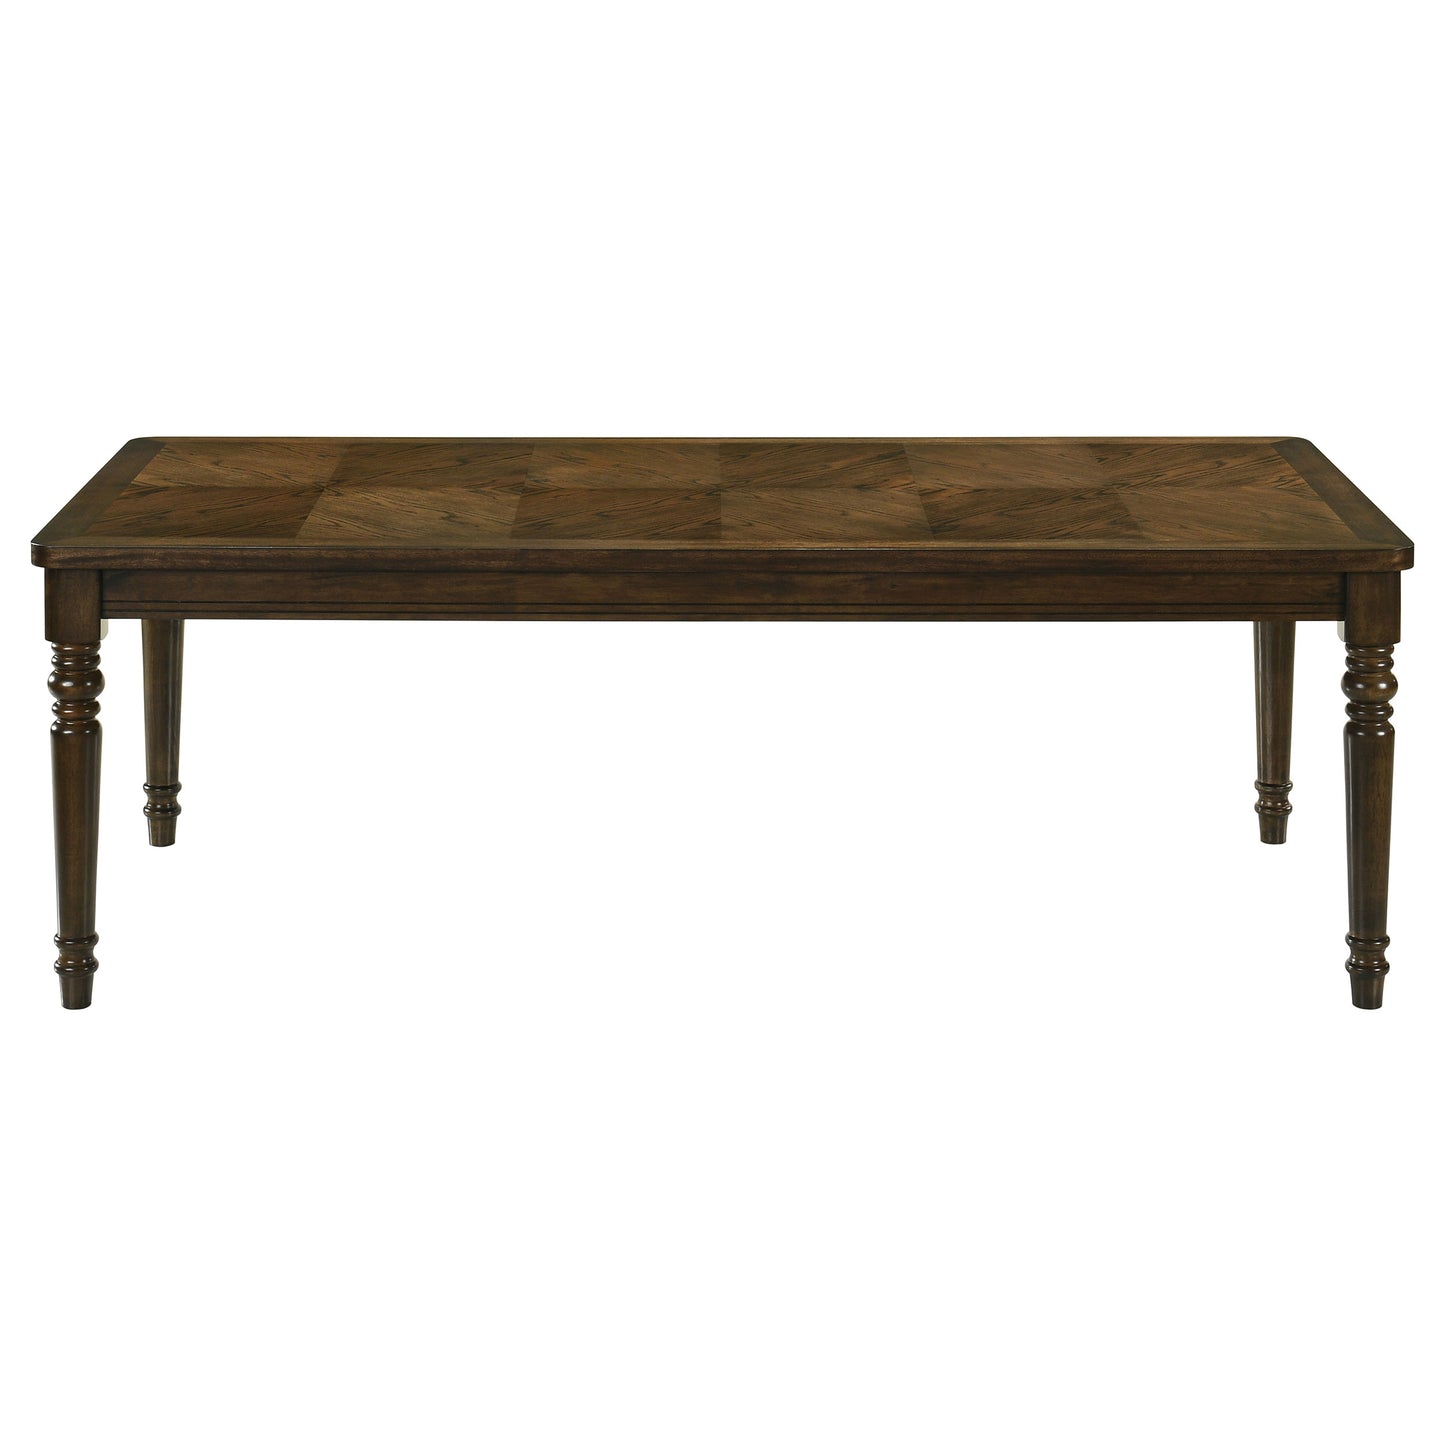 Willowbrook Rectangular 87-inch Wood Dining Table Chestnut